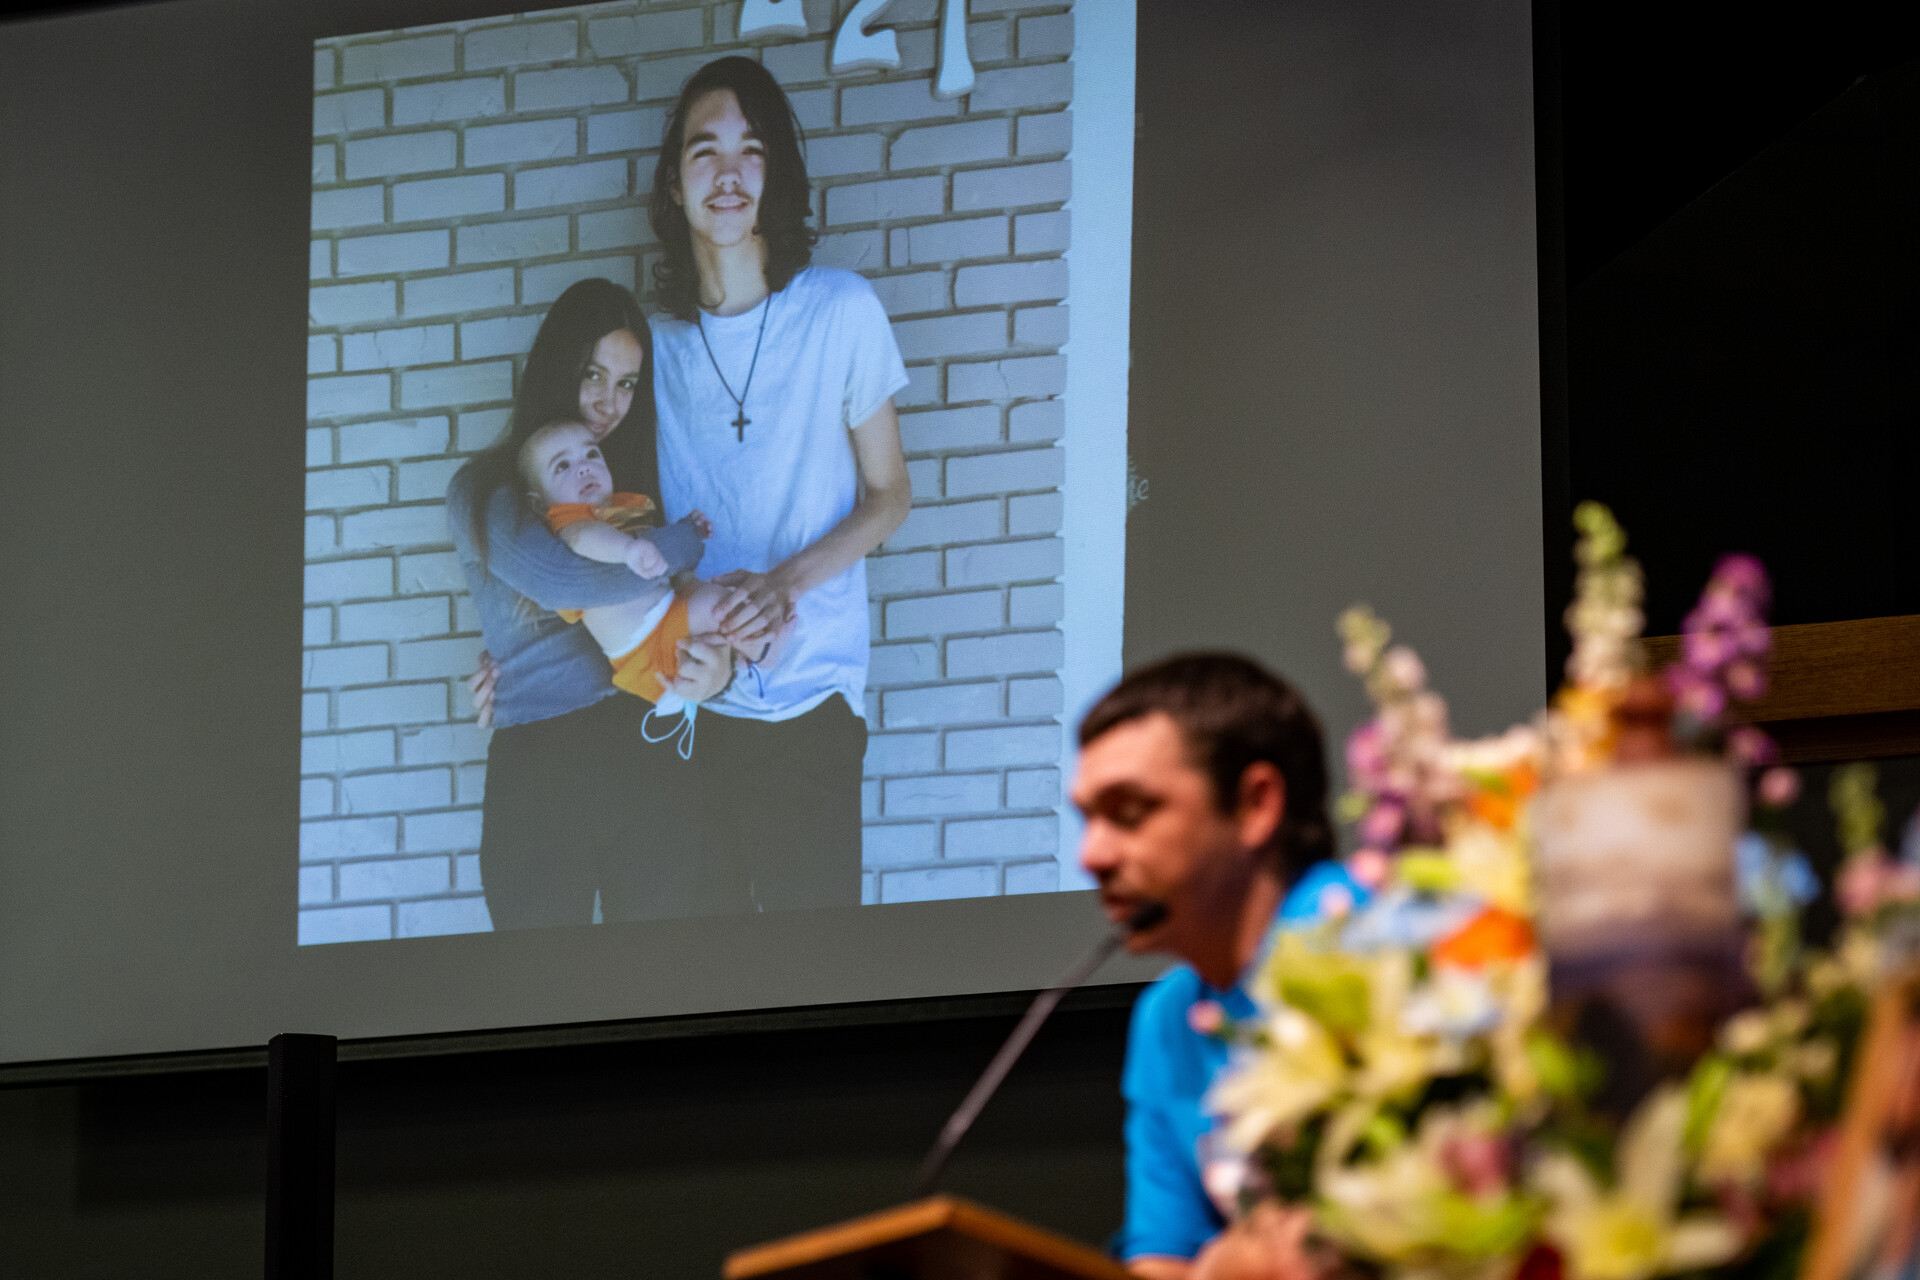 A man at a podium inside a church memorial service speaks with a projected photo of a young couple and their baby behind him.